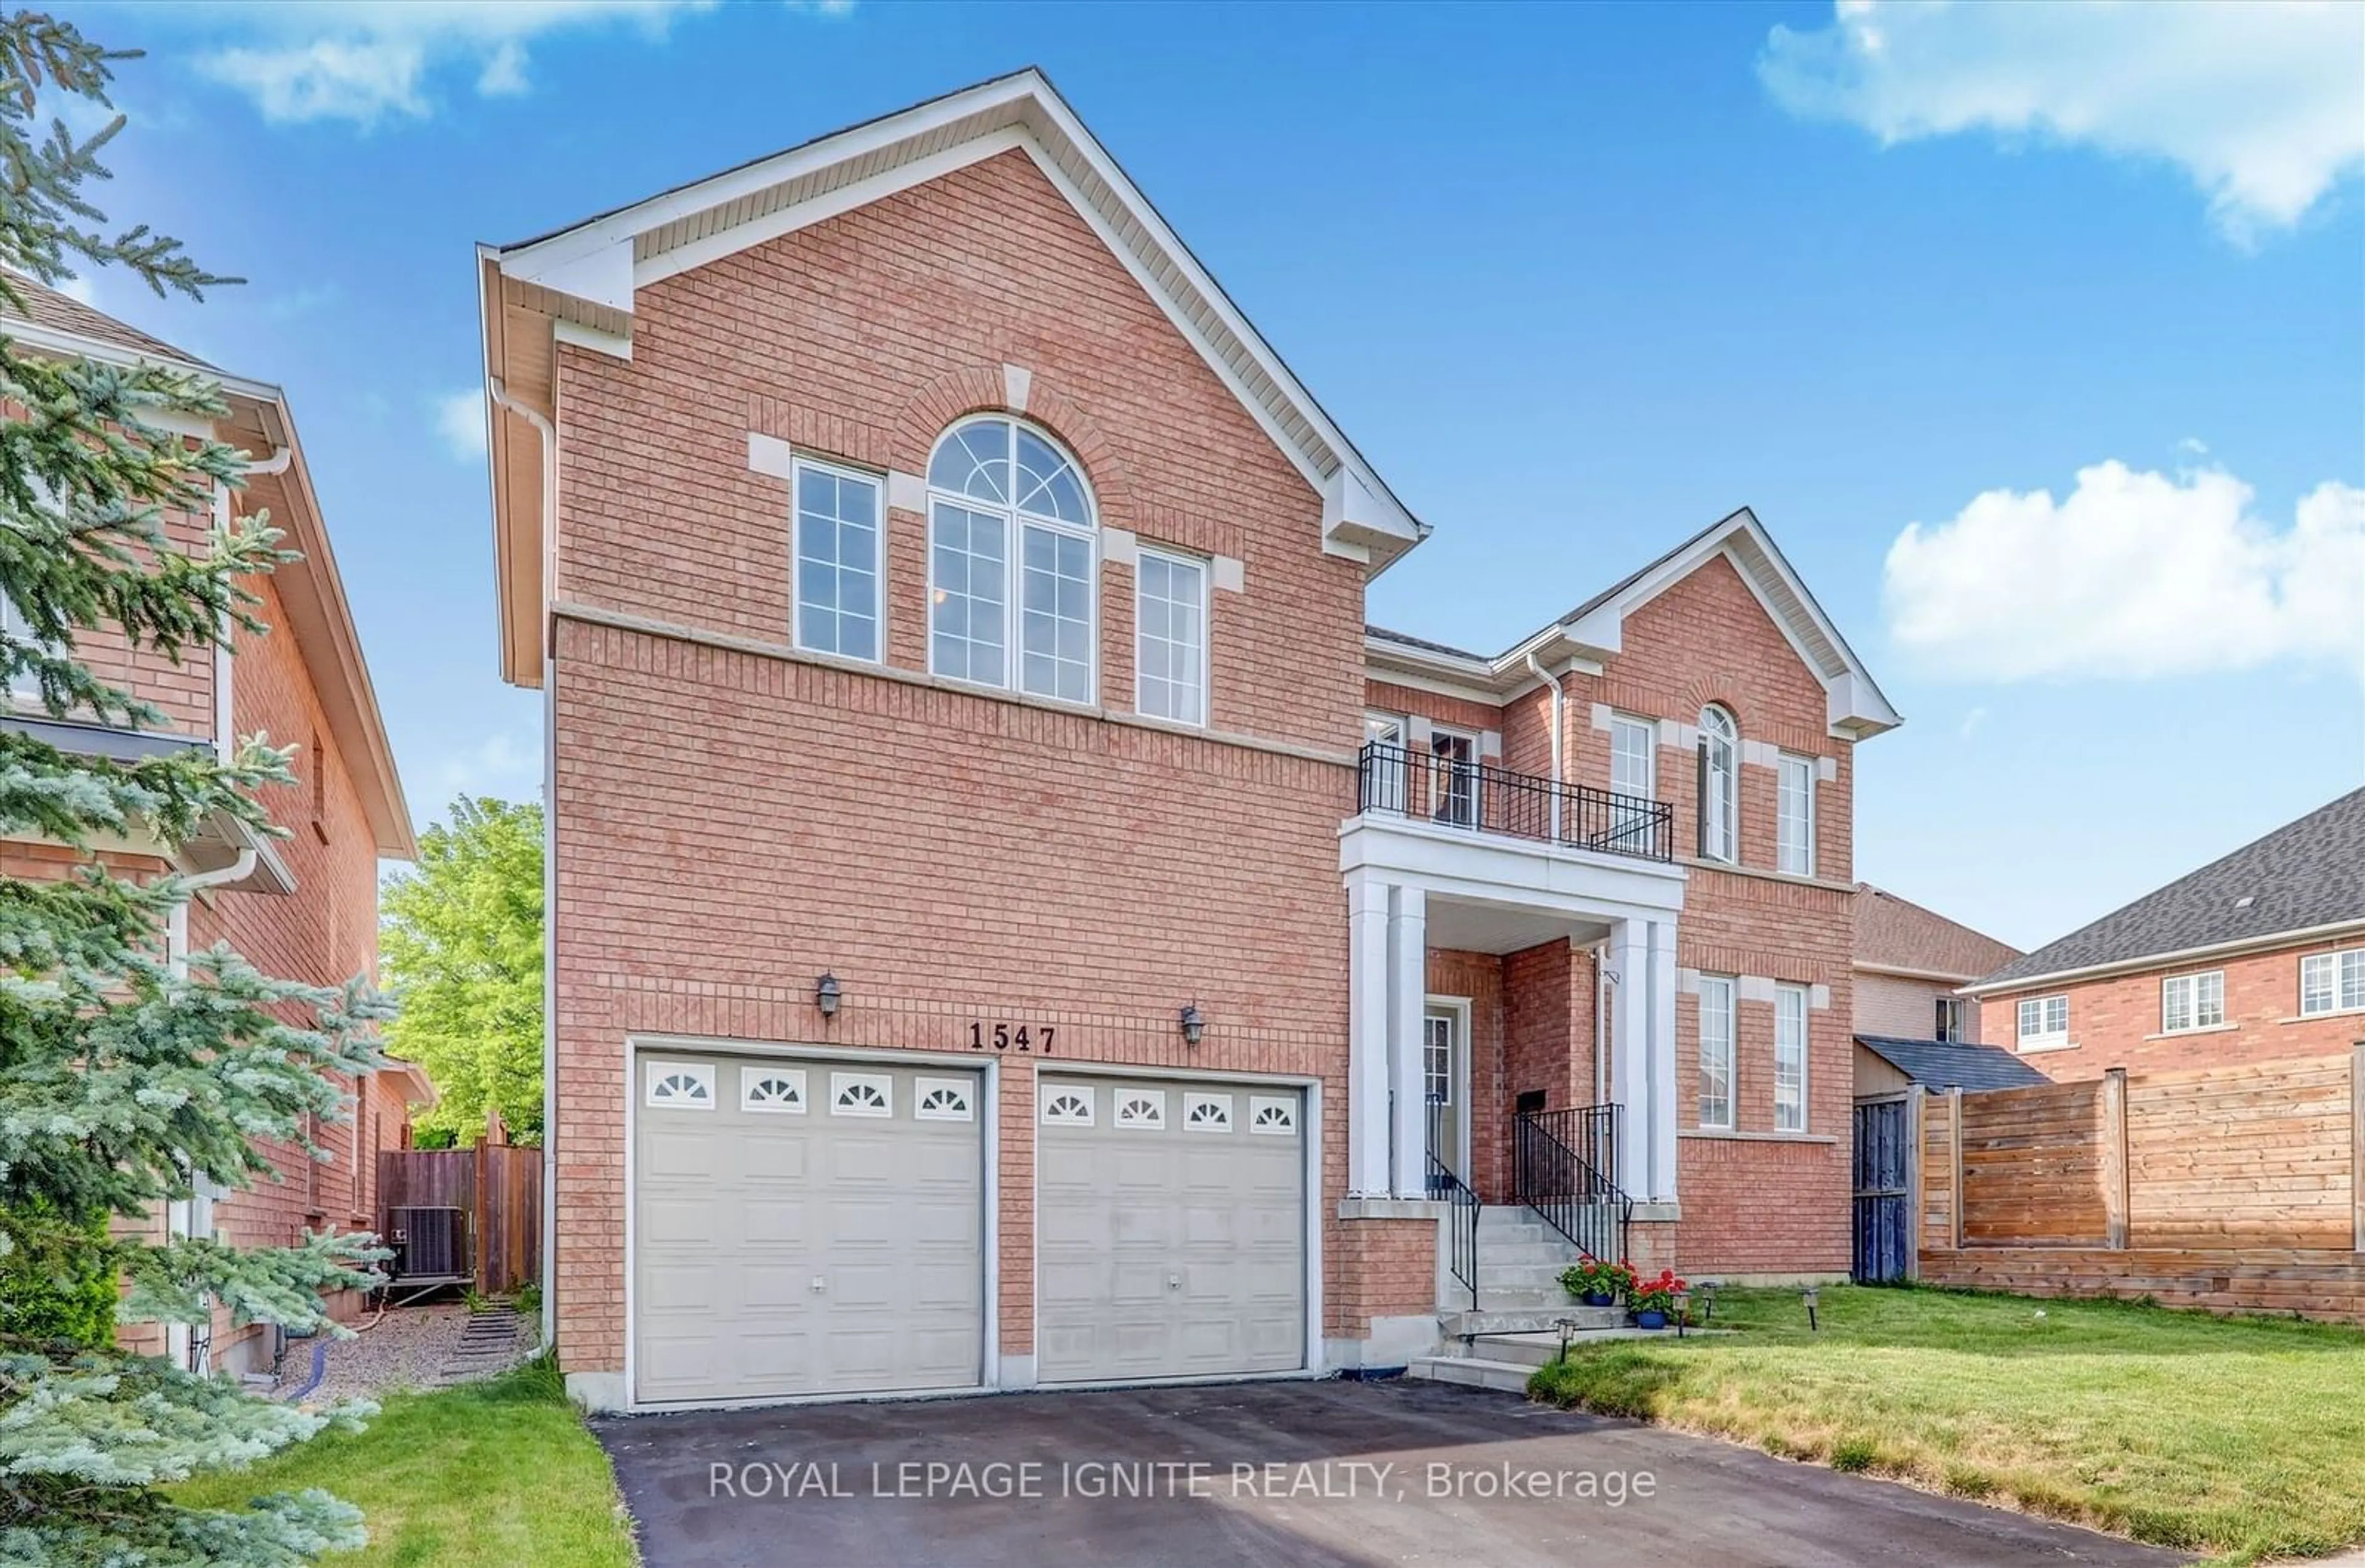 Home with brick exterior material for 1547 Spencely Dr, Oshawa Ontario L1K 0A7